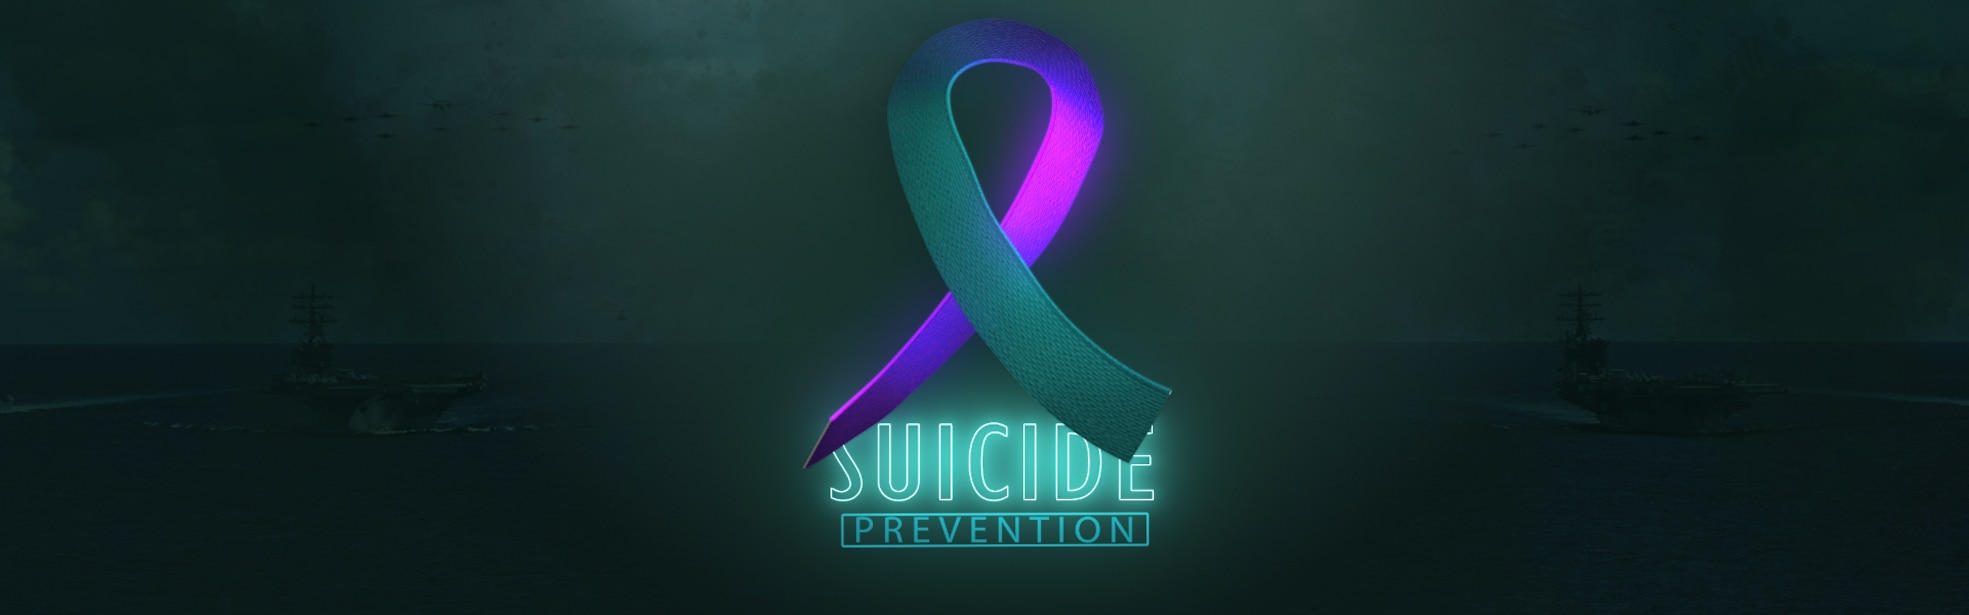 Teal and purple 3-D ribbon superimposed over the words "Suicide Prevention"